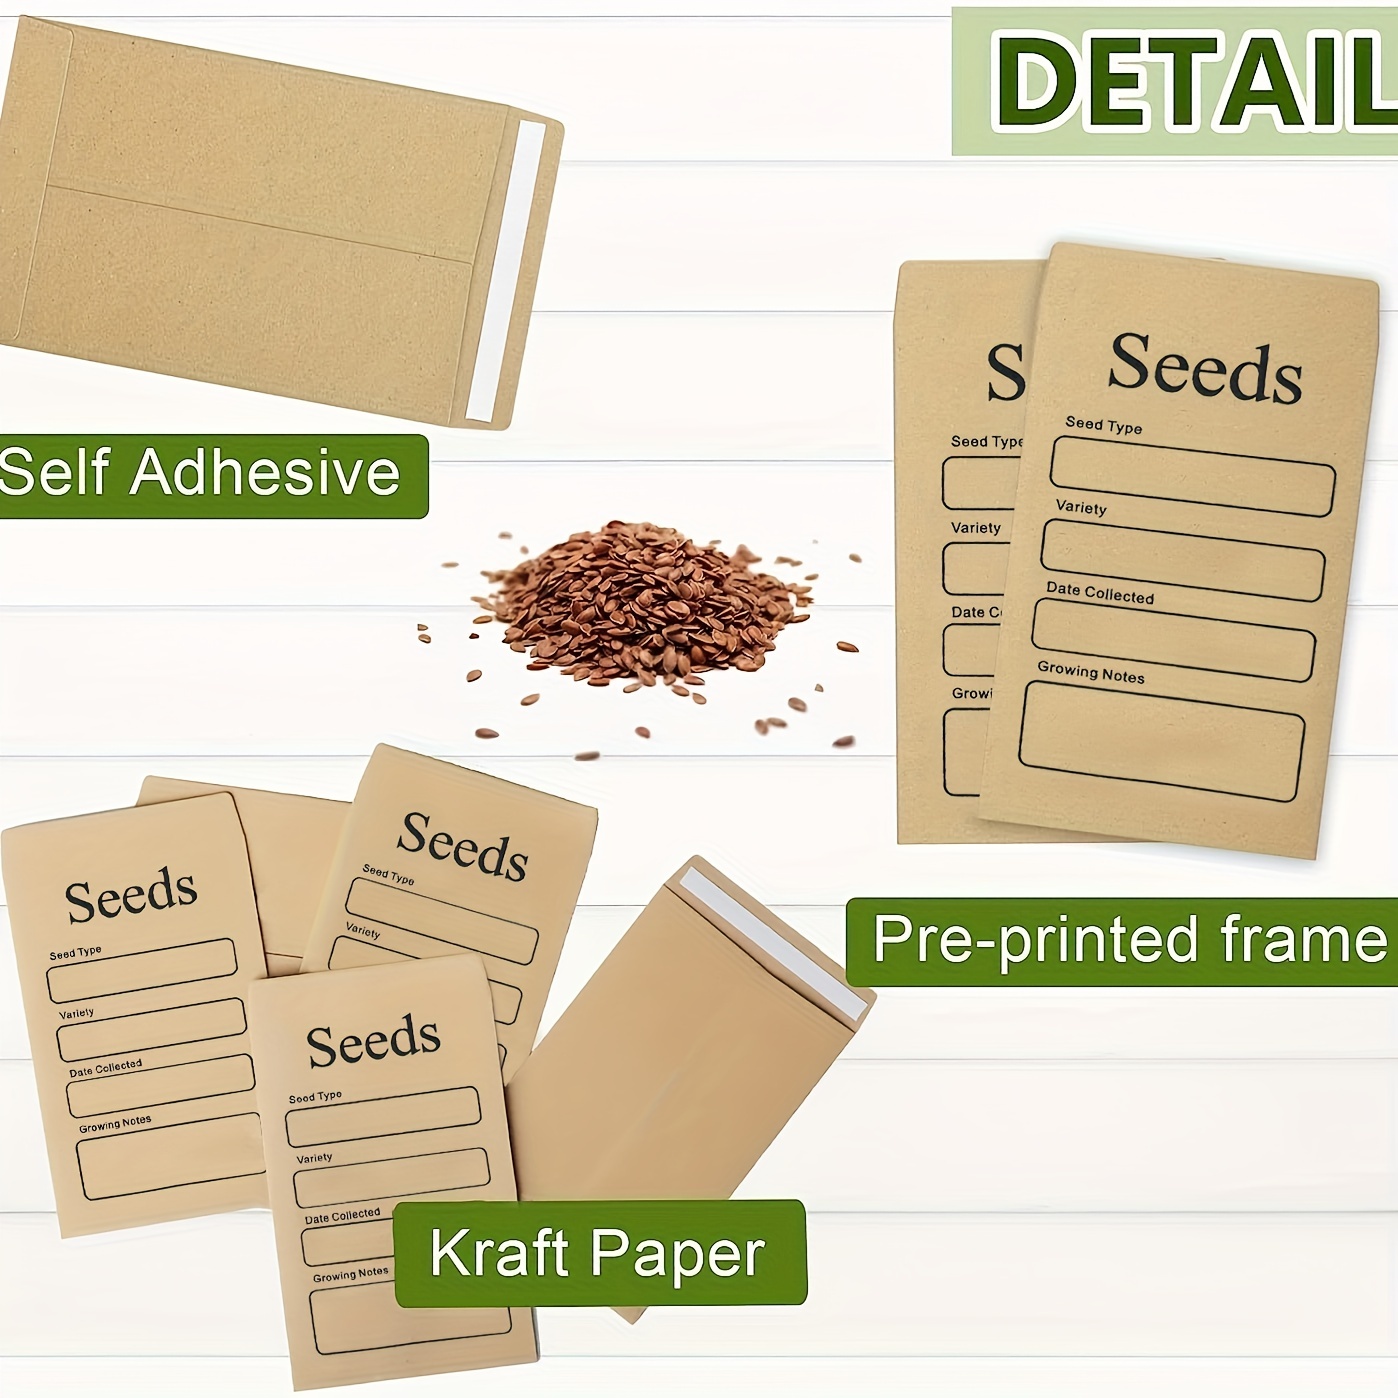 20pcs, Seed Envelopes, Resealable Seed Packets Envelope Self Adhesive  Sealing Seed Saving Envelopes Small Brown Paper Seed Storage Envelopes For  Colle